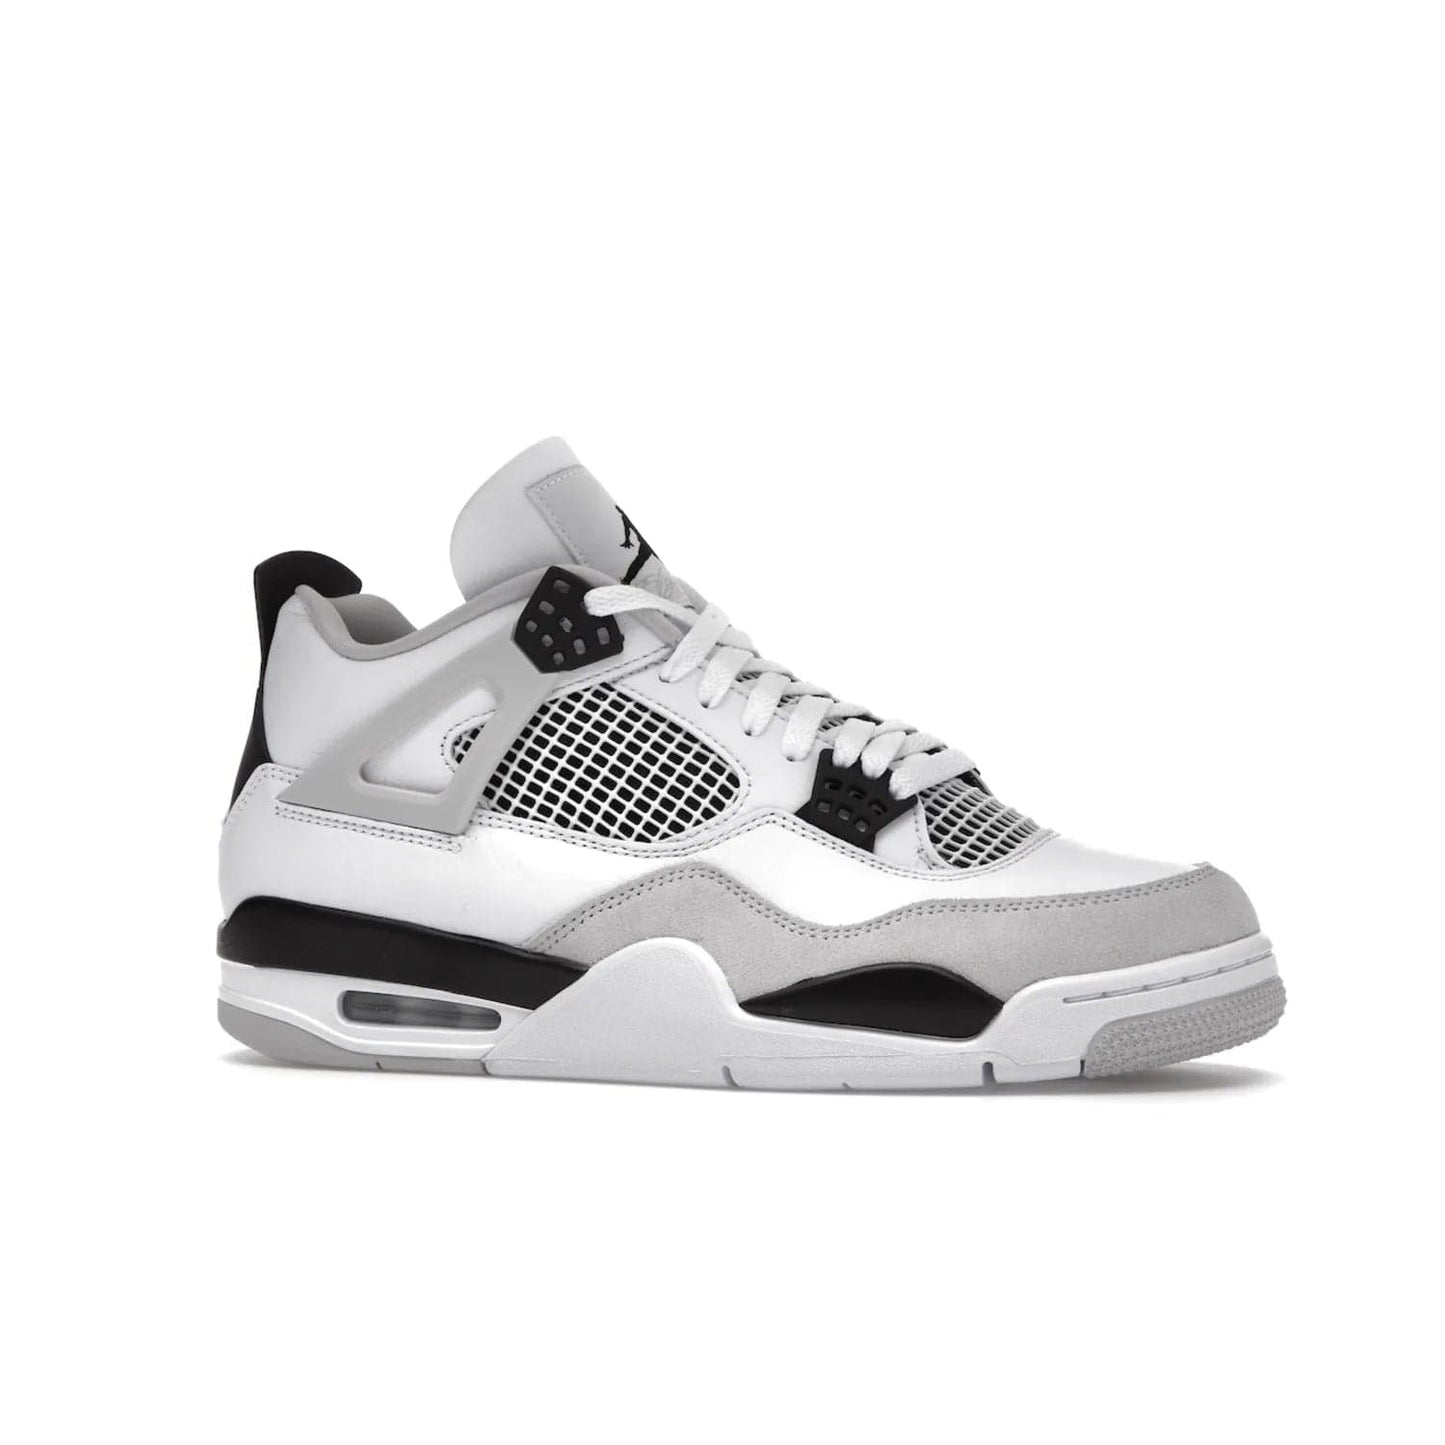 Jordan 4 Retro Military Black - Image 3 - Only at www.BallersClubKickz.com - Updated Air Jordan 4 style with a white/black/light grey sole and visible Air unit. Released in May 2022, offering timeless classic style and comfort.